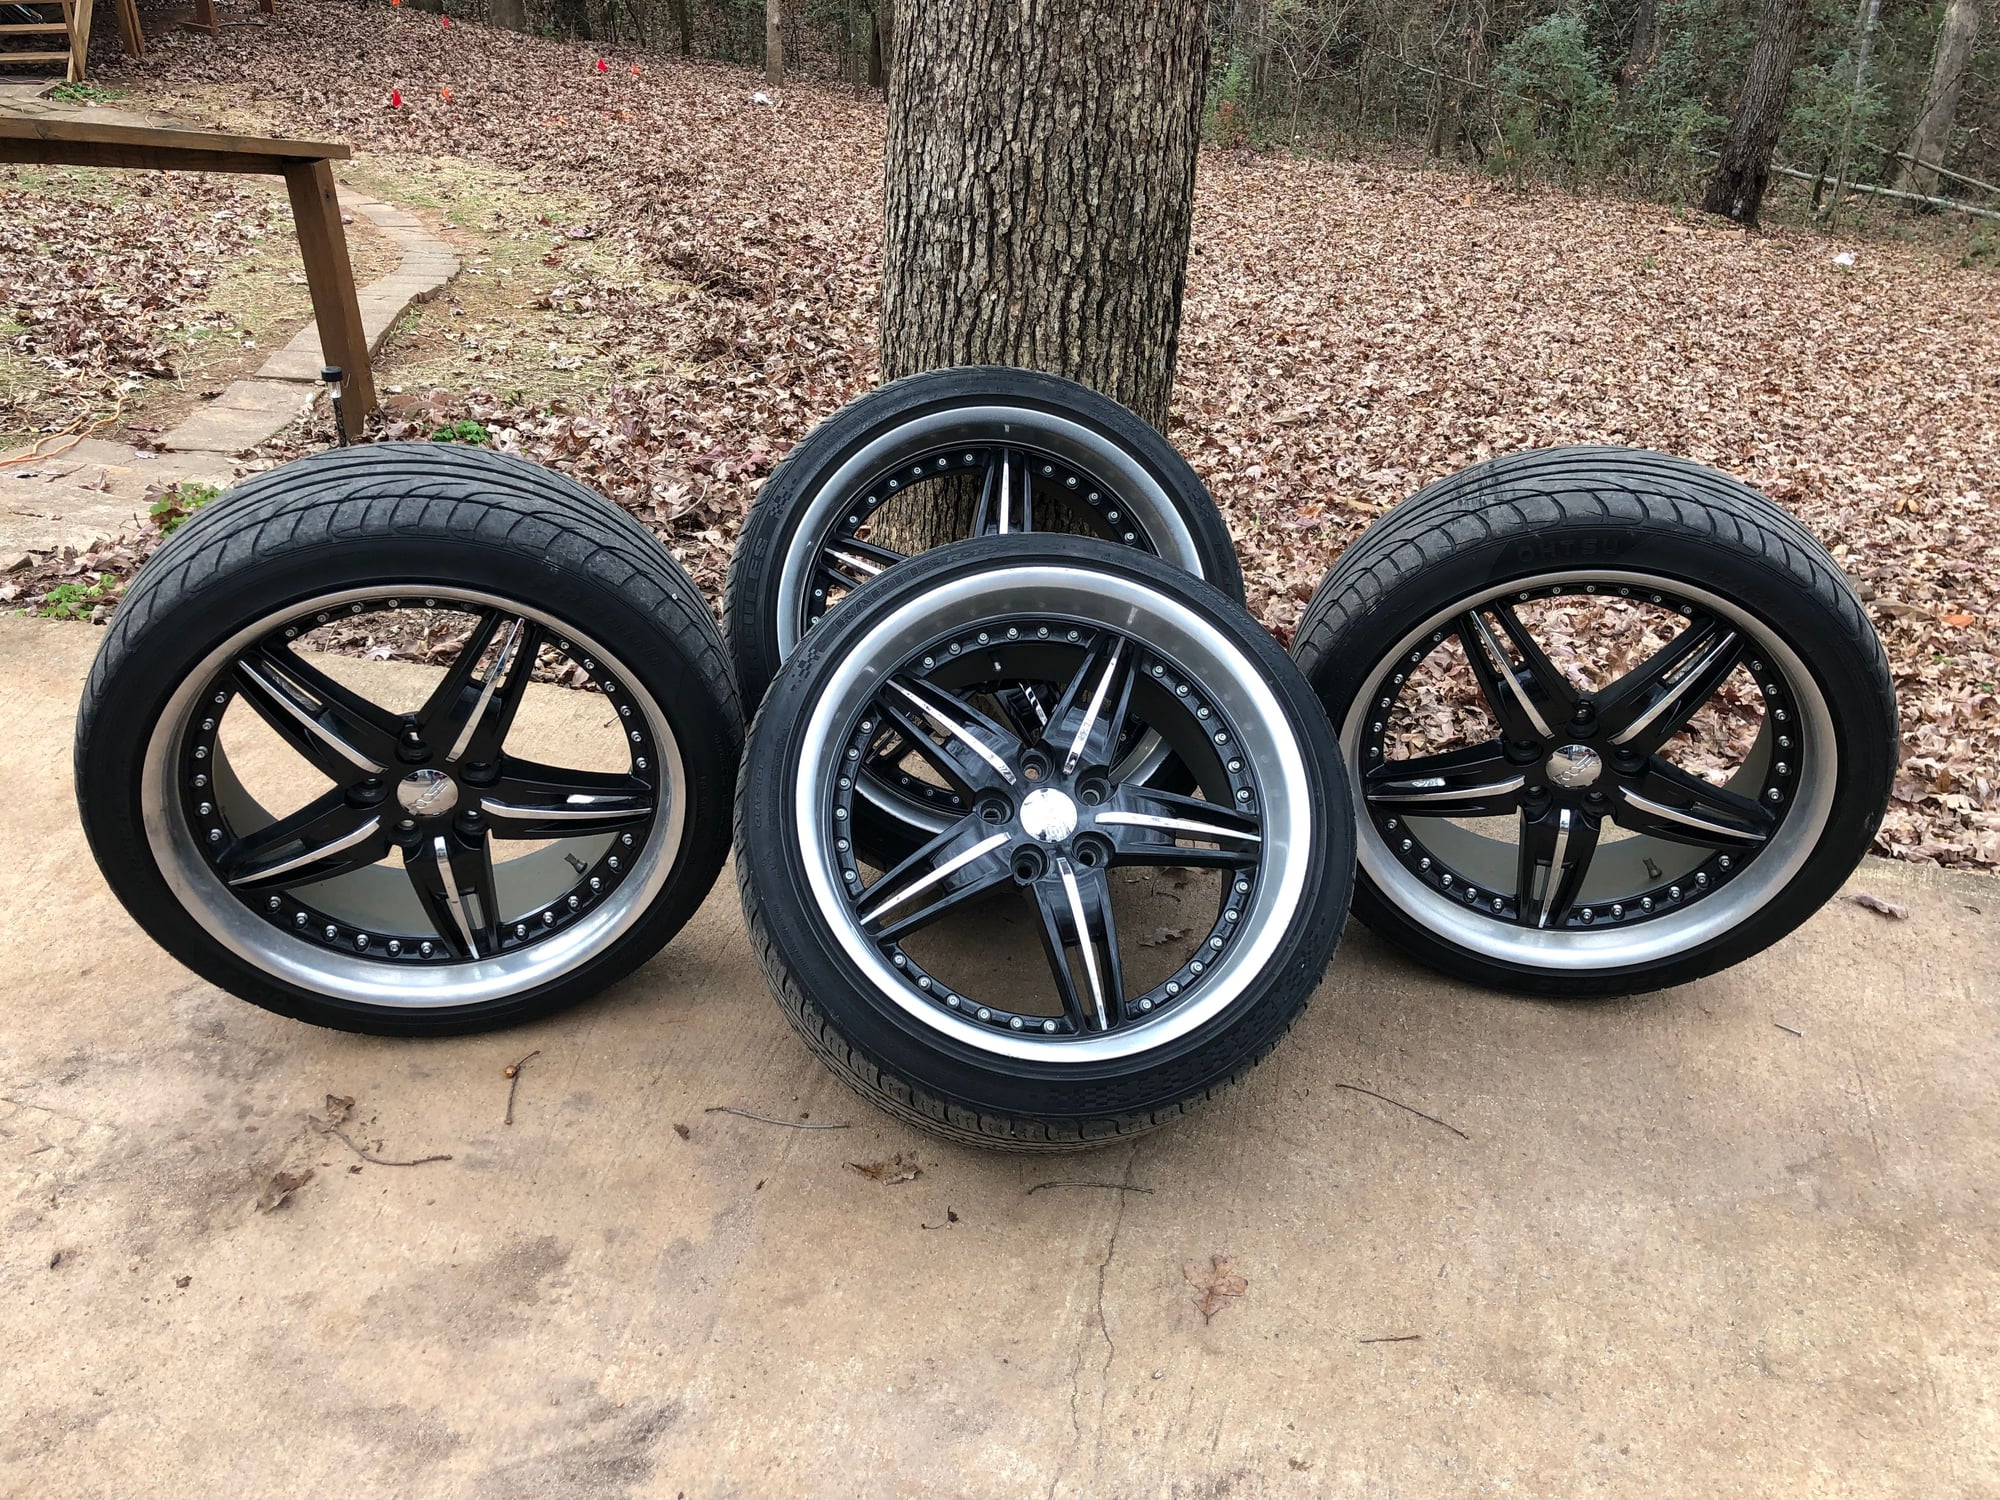  - 1993-2002 Camaro or Trans Am Foose wheels and tires - Pickens, SC 29671, United States